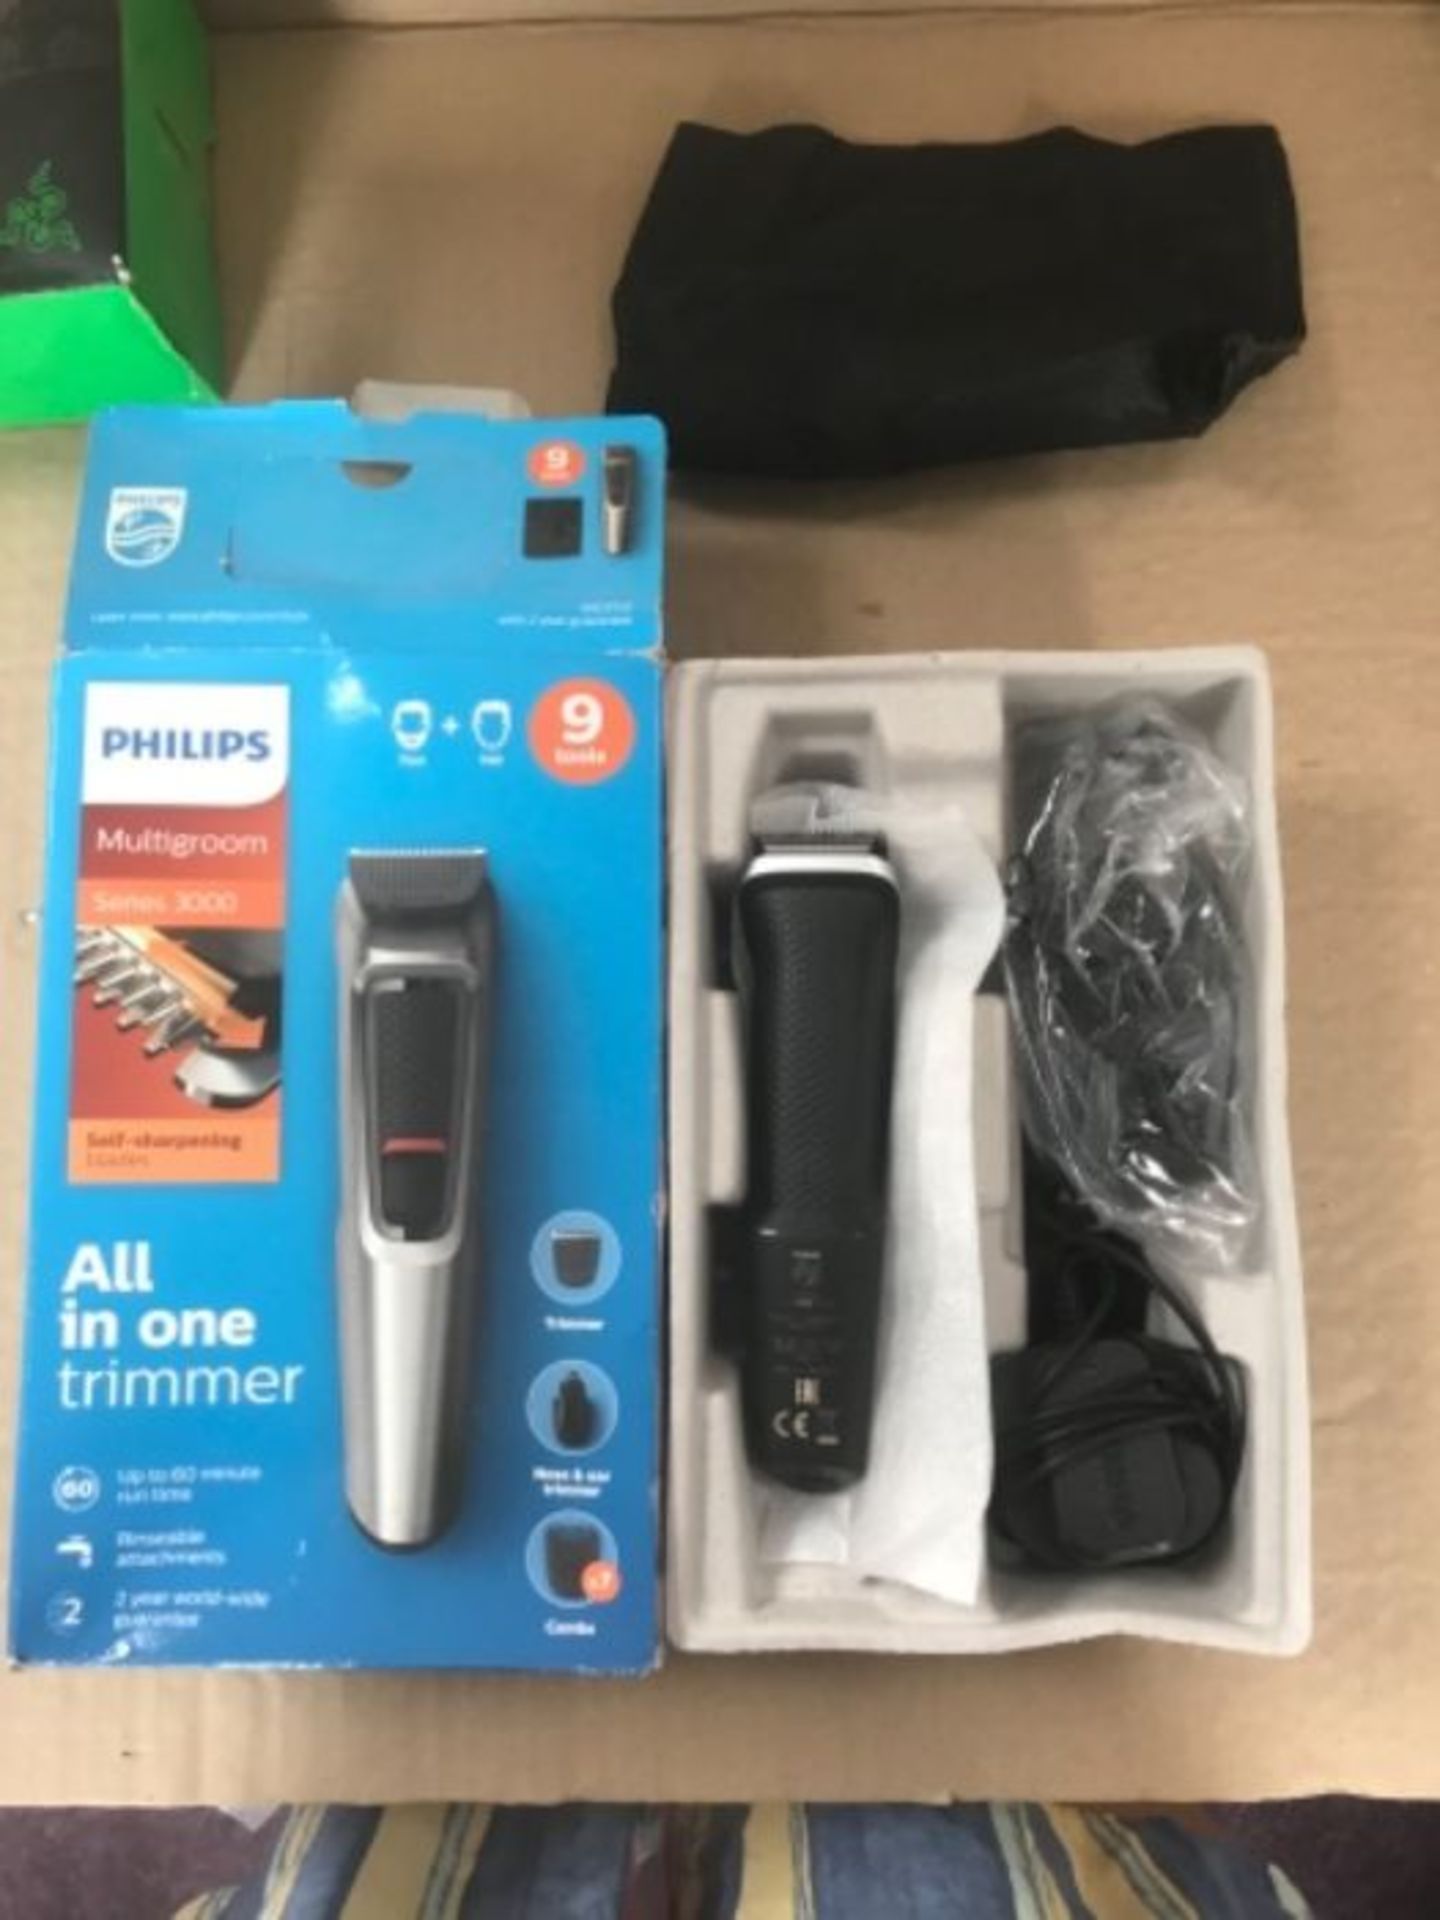 Philips 9-in-1 All-In-One Trimmer, Series 3000 Grooming Kit, Beard Trimmer and Hair Cl - Image 2 of 2